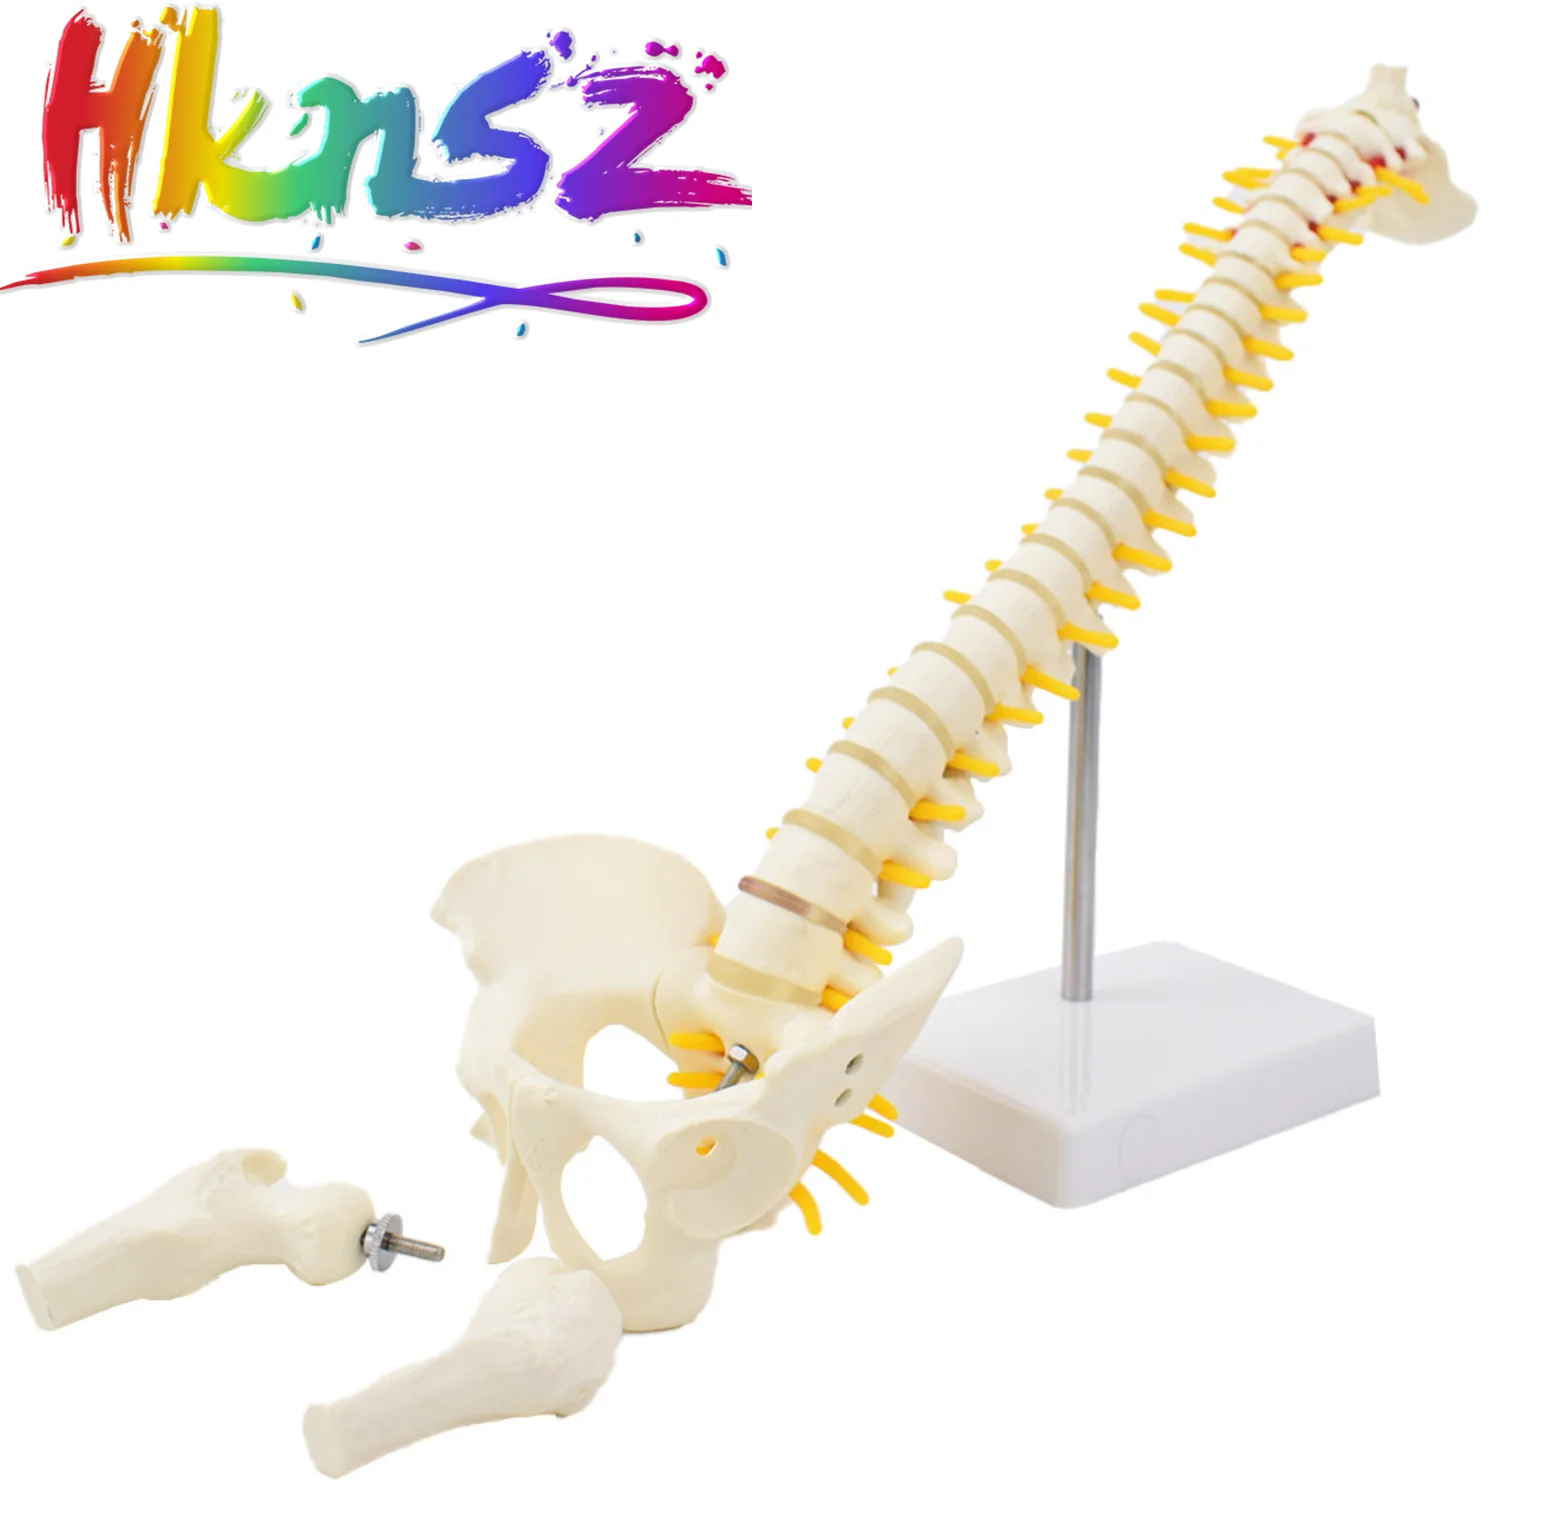 

45CM Human Spine with Pelvic Model Human Anatomical Anatomy Spine Medical Model spinal column model+Stand Fexible